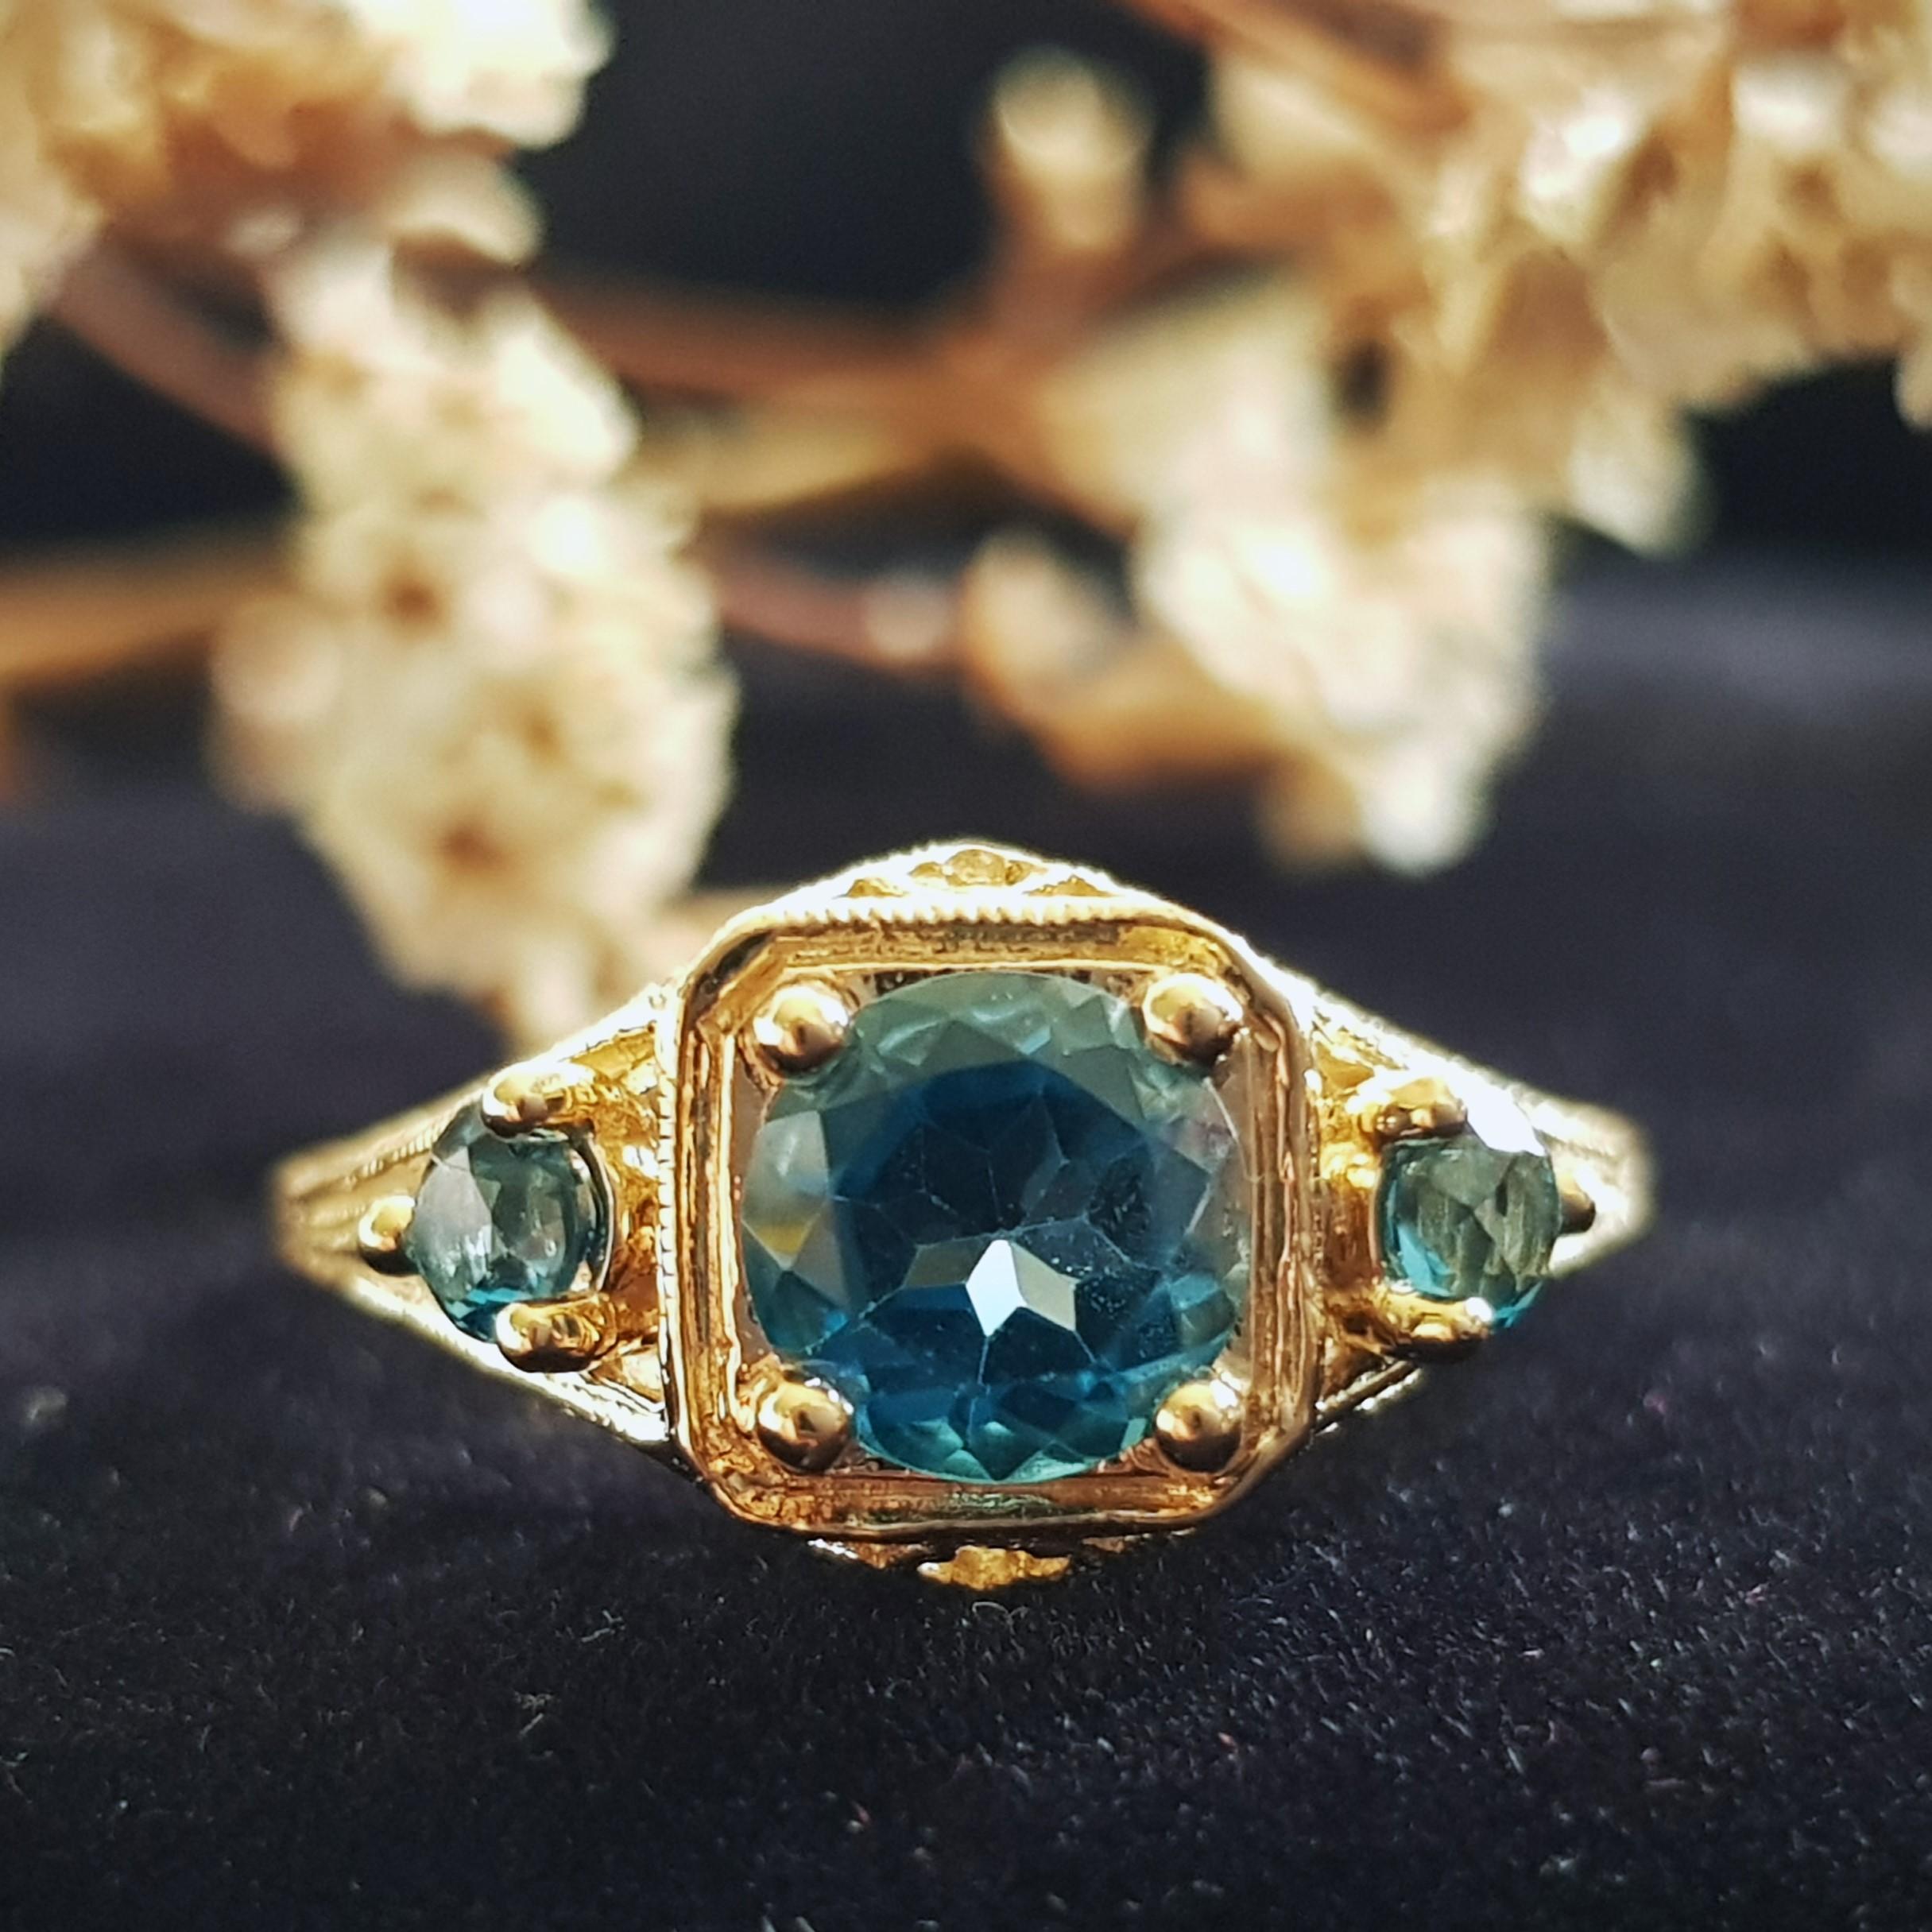 An Art Deco style filigree three stone ring with 6.0 mm. London blue topaz in the center and two 3.0 mm. and London blue topaz each side. Filigree rings are timeless in style and can be enjoyed, cherished and handed down as precious family